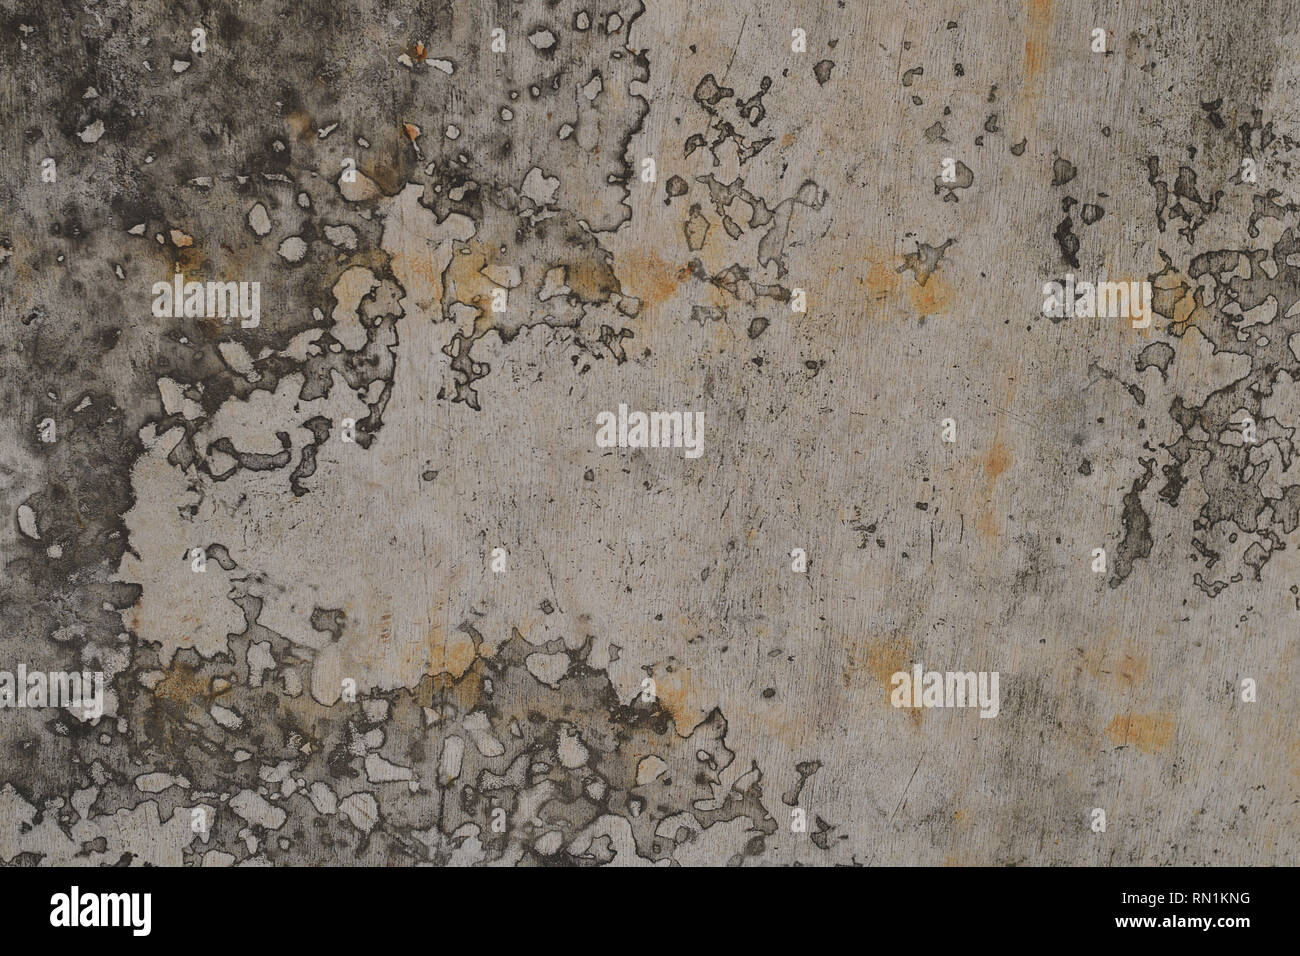 Old Weathered Plaster Wall Texture Background Plaster Paint Rough With Vignette High Resolution Background For Design Blackdrop Or Overlay Stock Photo Alamy